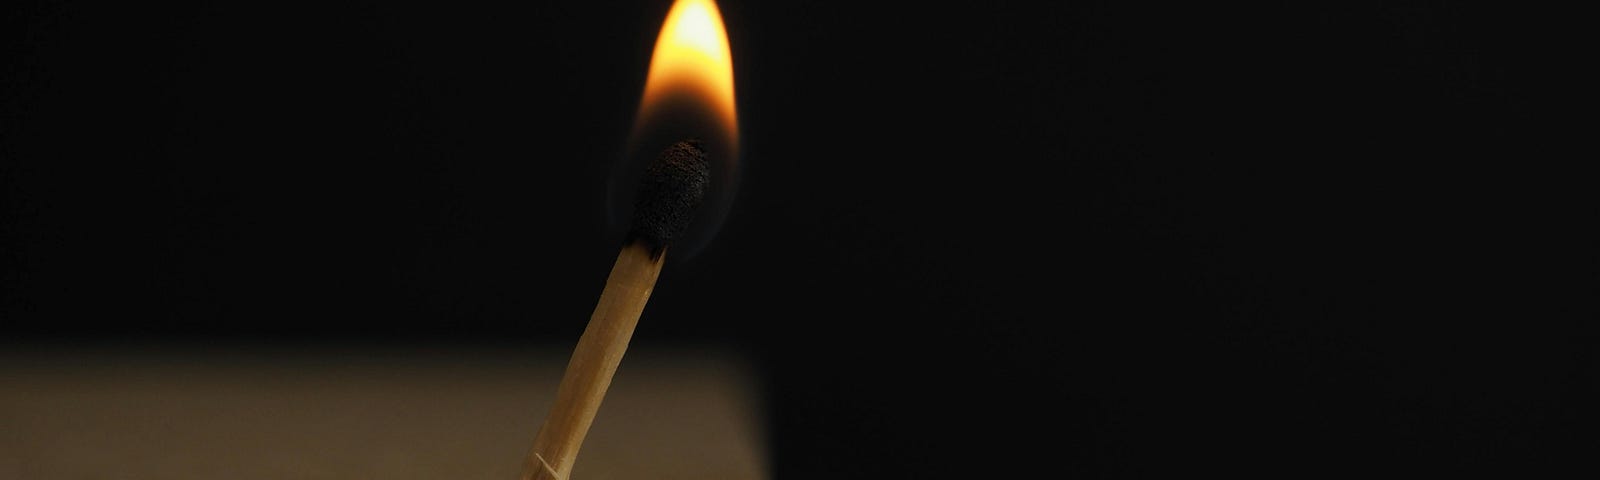 Lighted Matchstick on Brown Wooden Surface